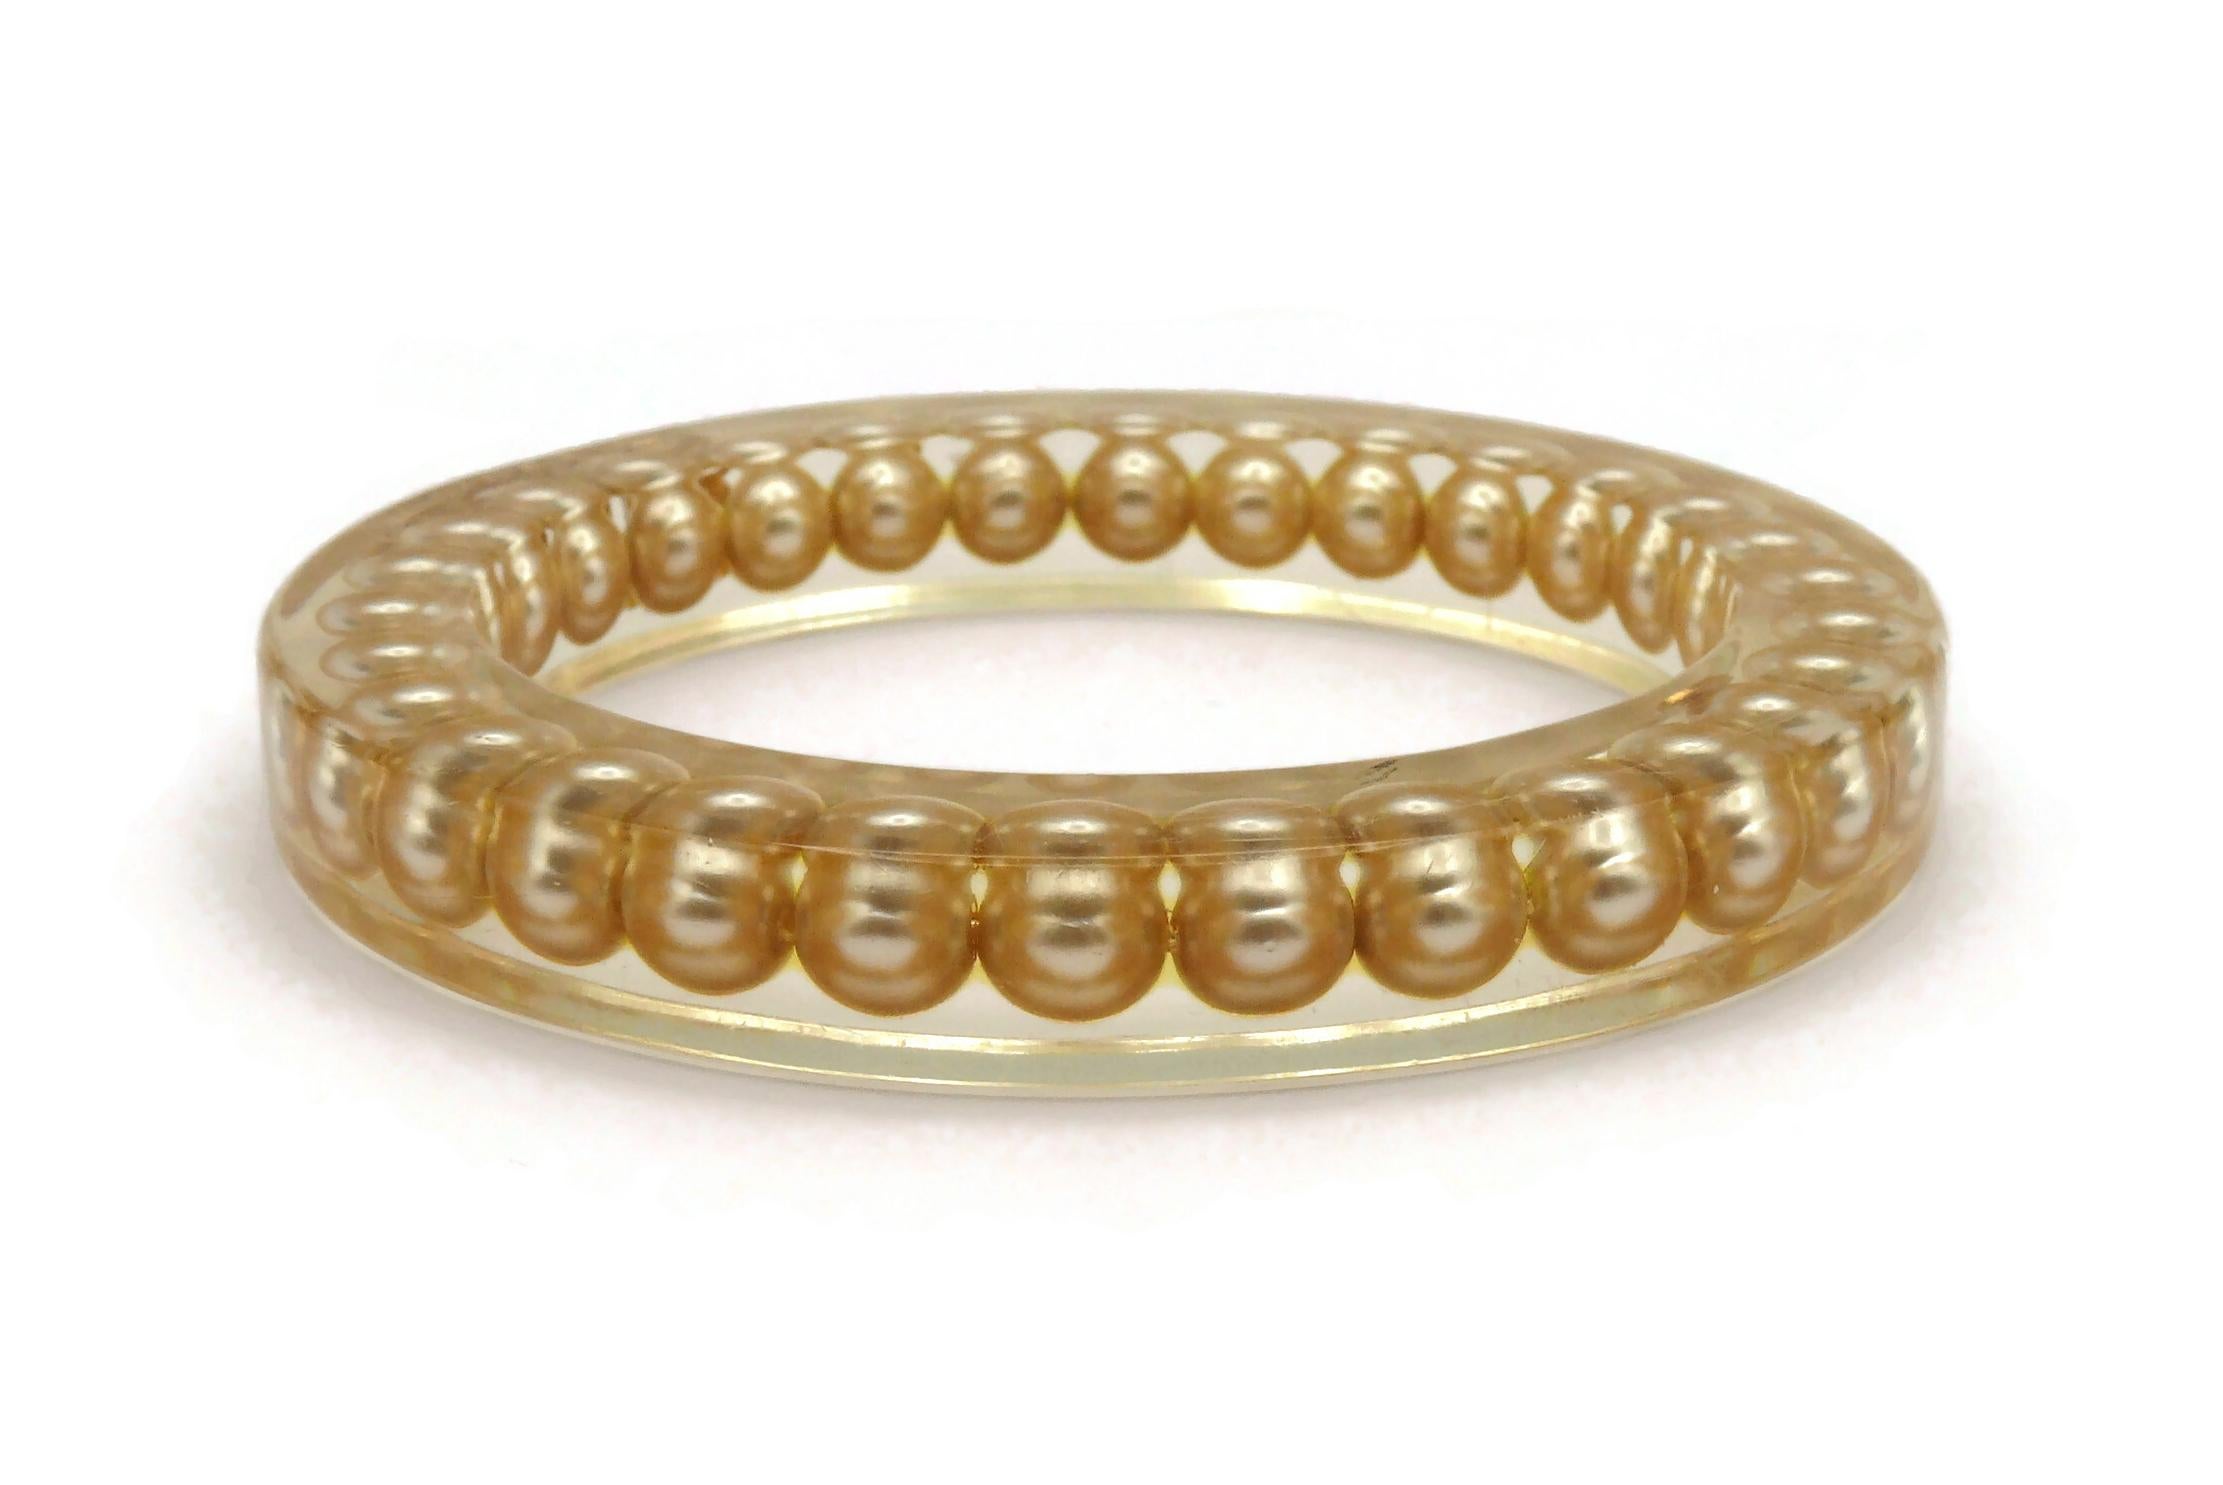 CHANEL by KARL LAGERFELD Vintage Lucite Pearl Inlaid Bangle, Spring 1997 For Sale 2